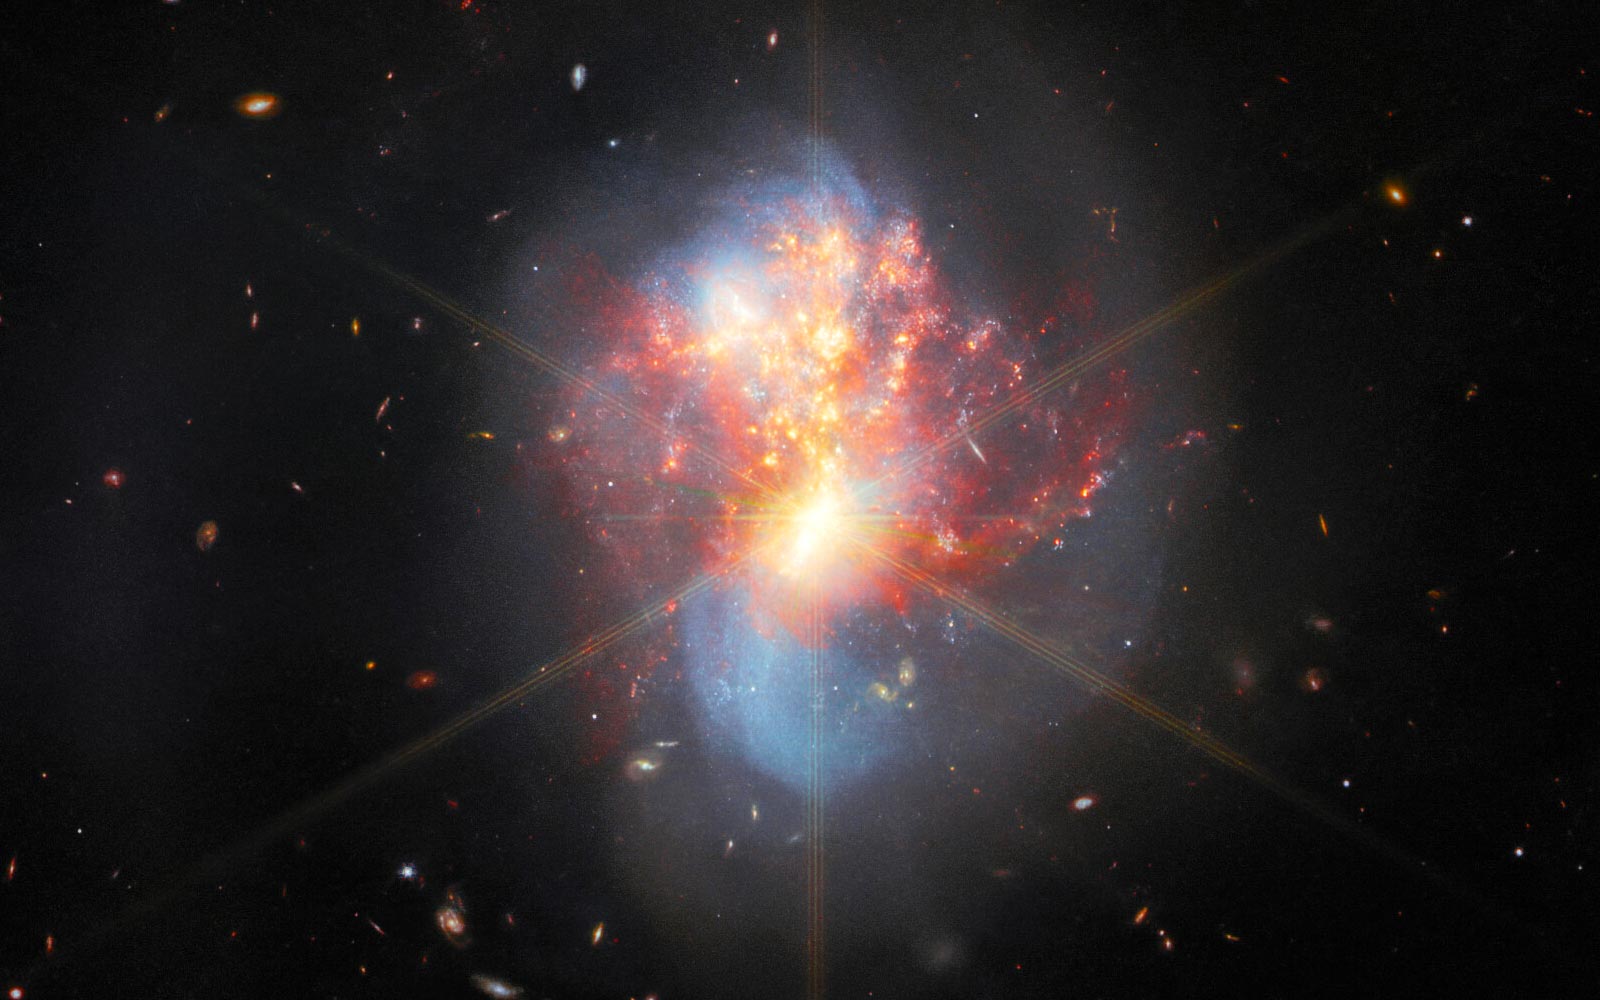 galactic-collision-webb-space-telescope-explores-frenzied-star-formation-in-merging-galaxies